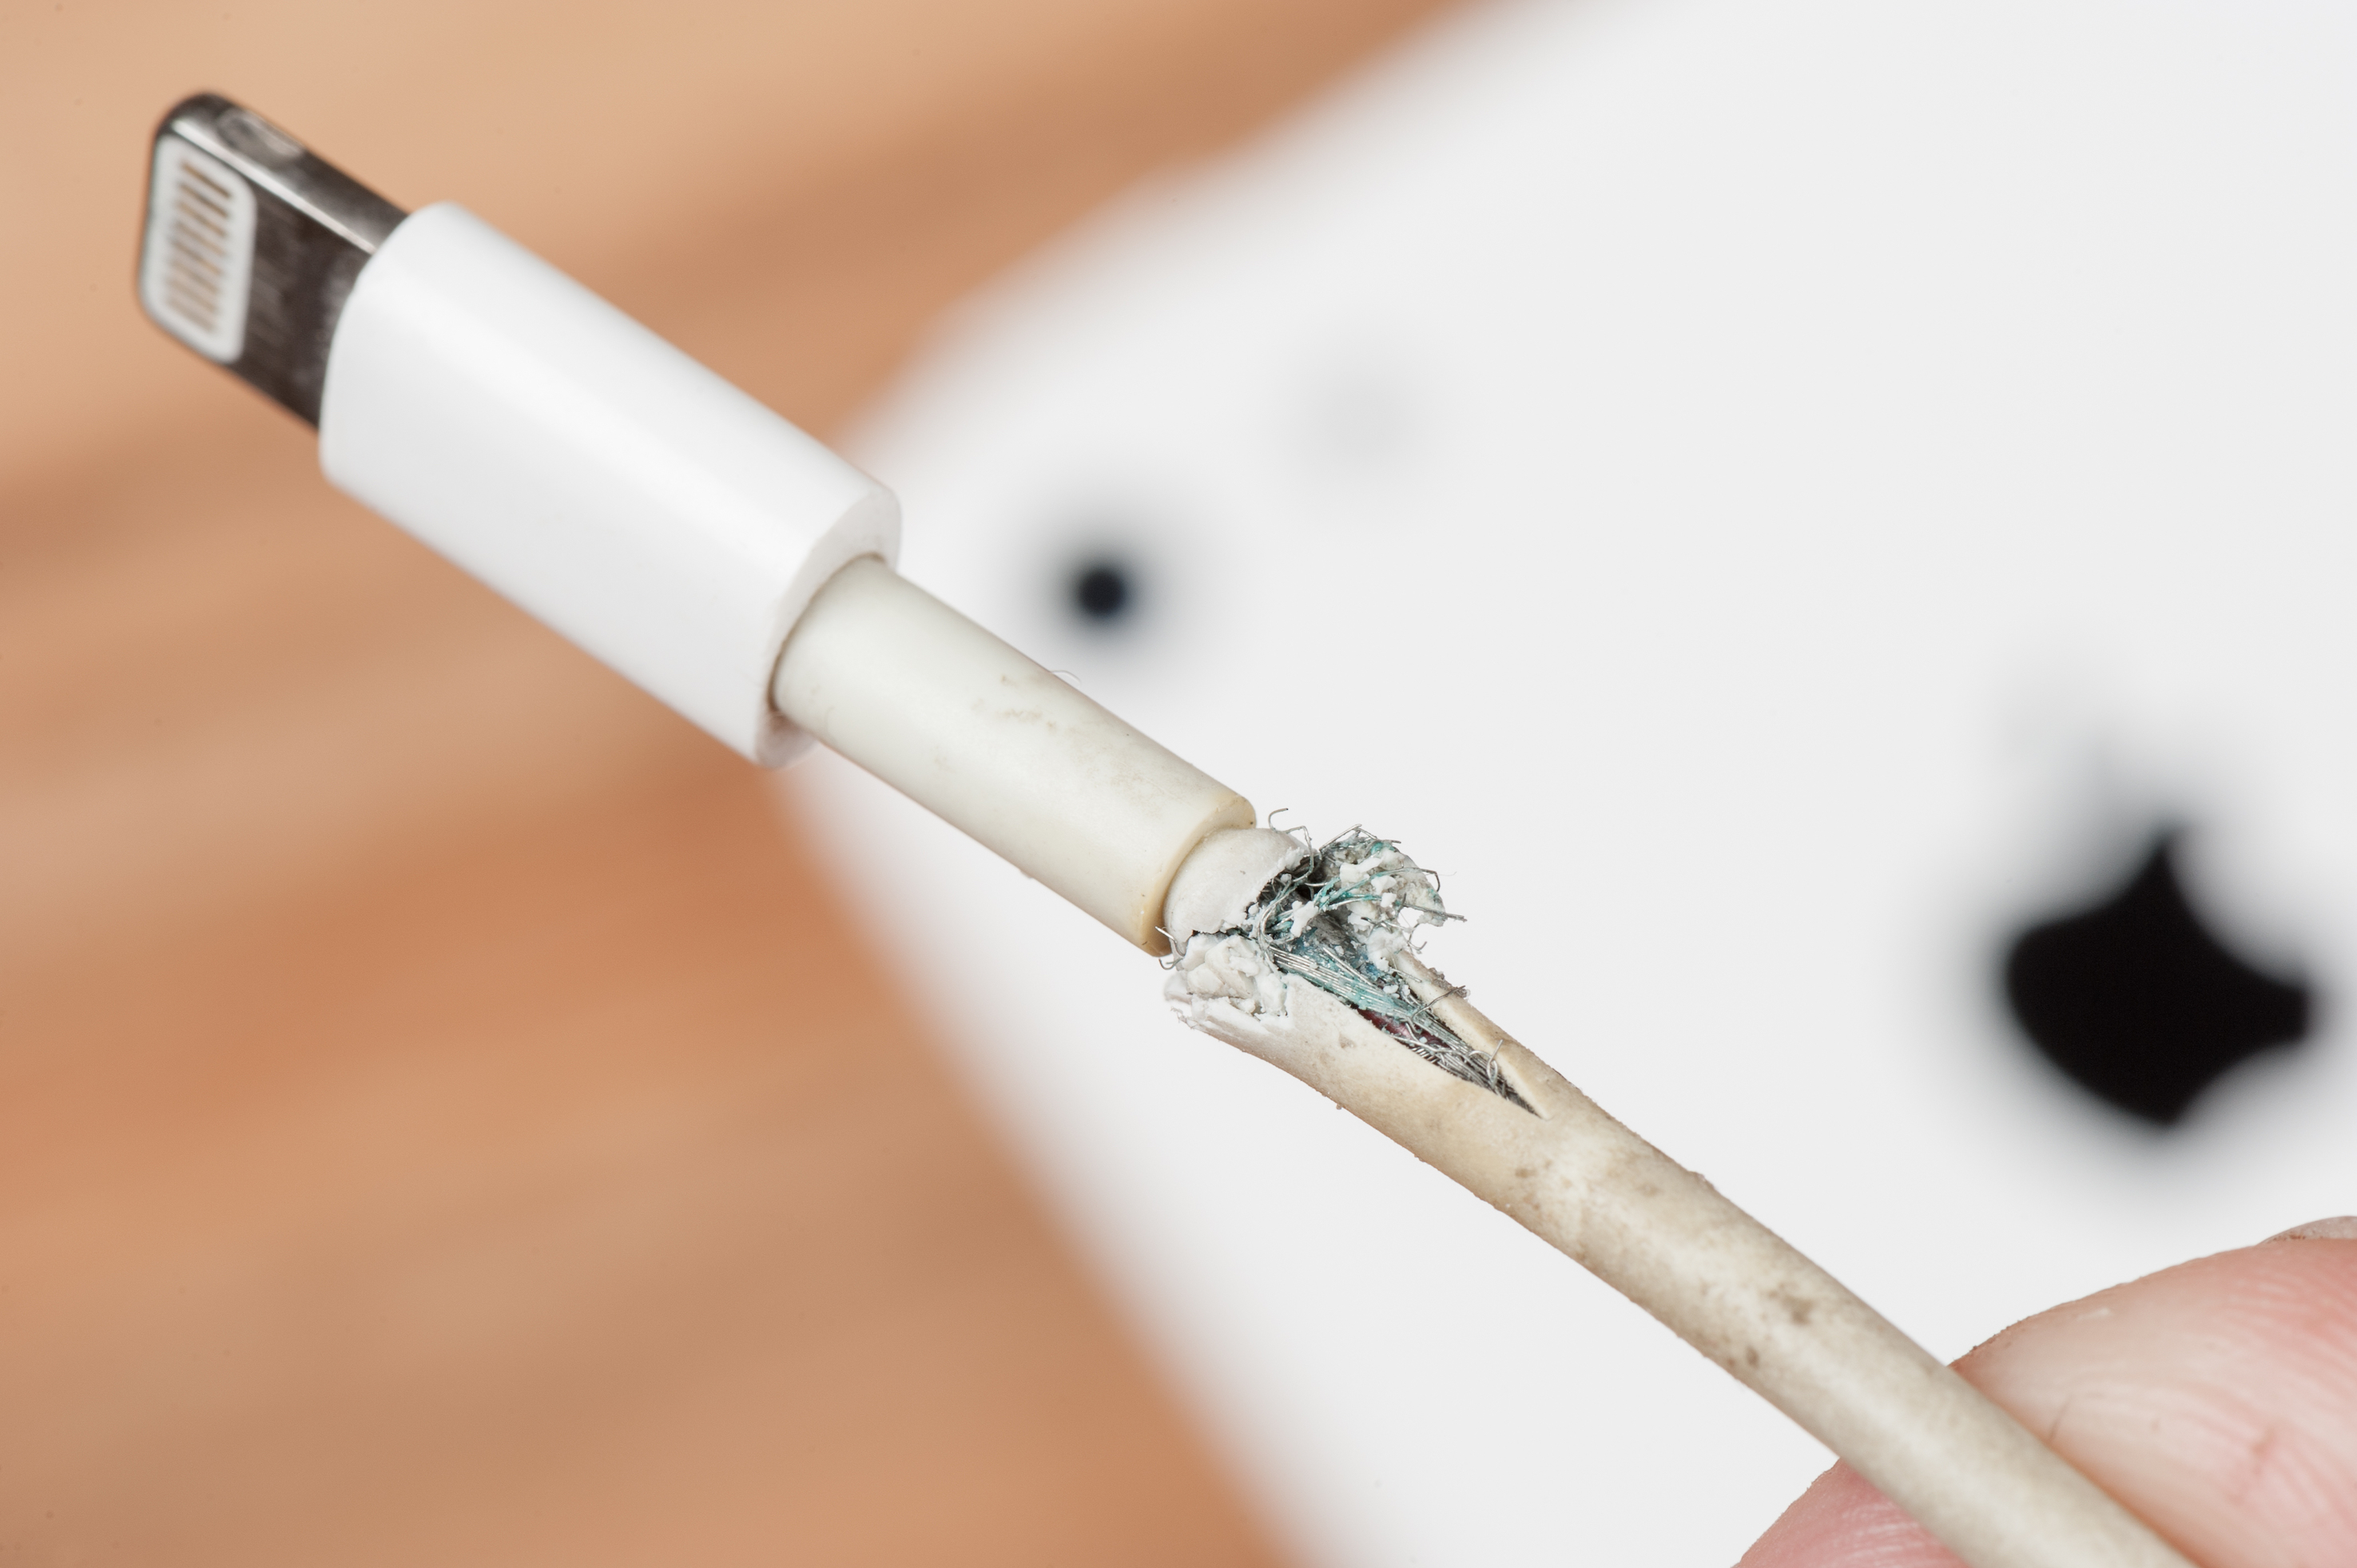 Tips for fixing an iPhone or iPad charger that appears to be broken or  frayed